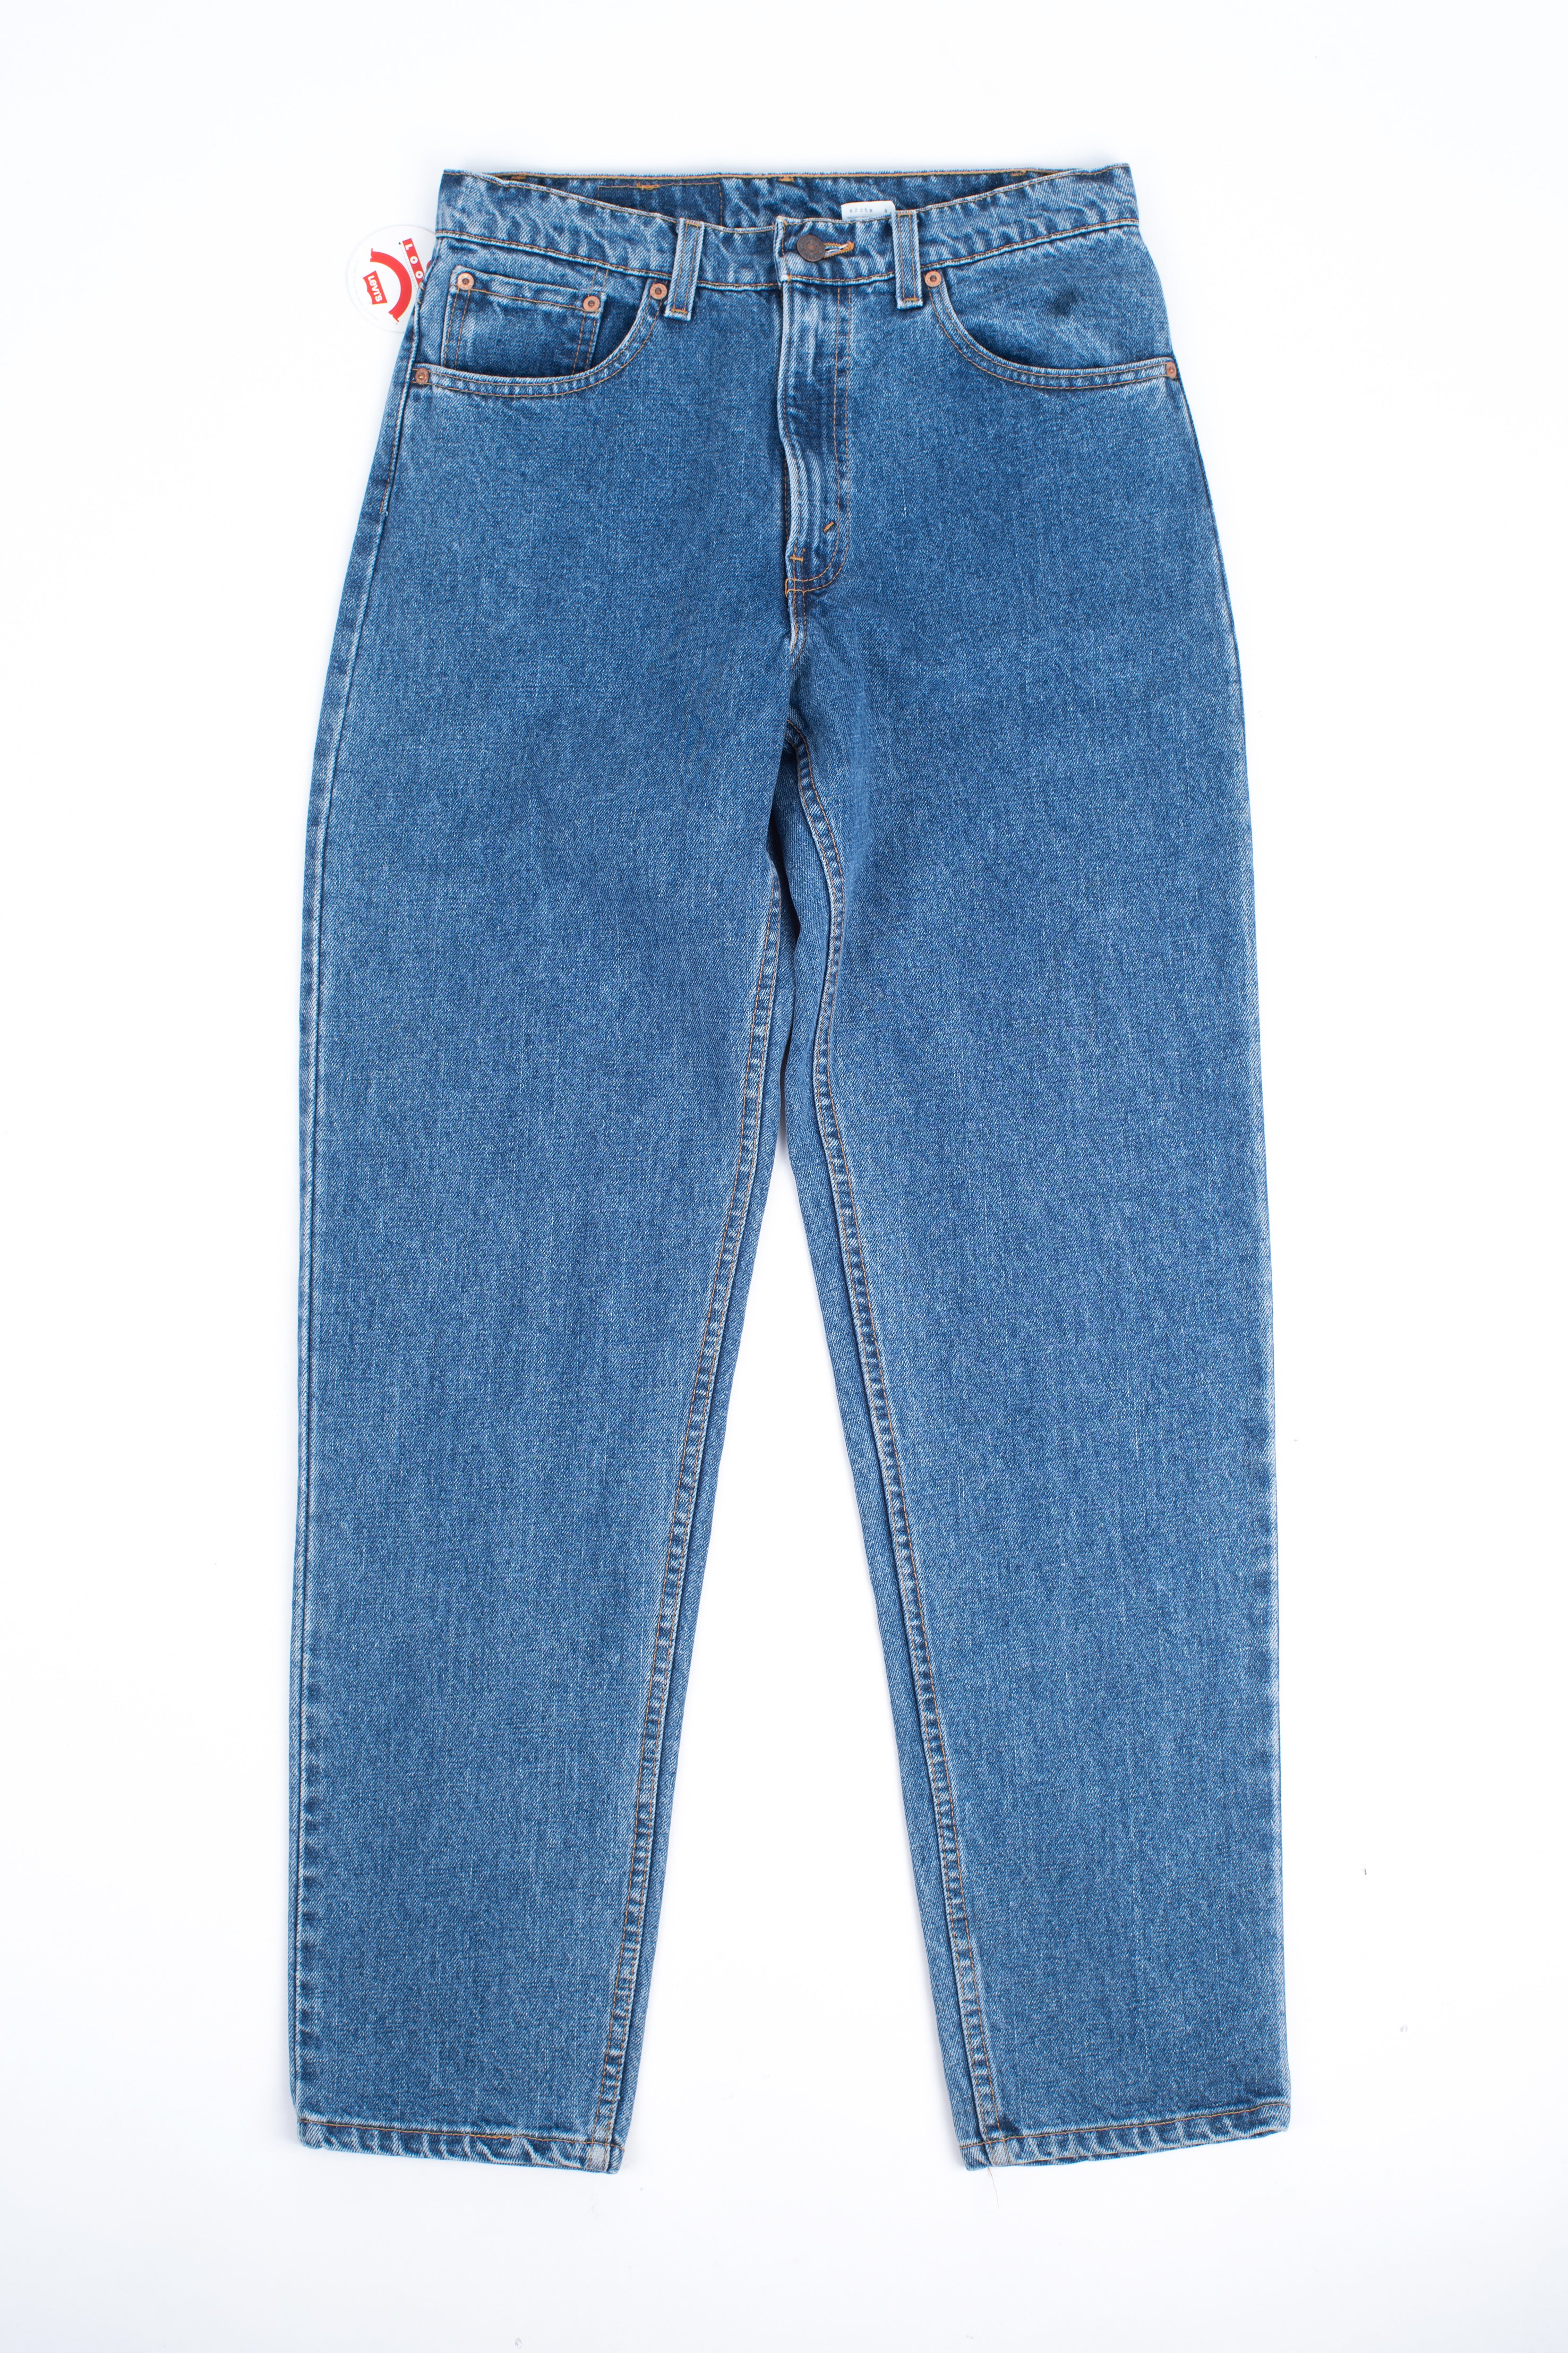 Levi's 550 Relaxed Fit Vintage New Blue Jeans, W32/L33 – SecondFirst